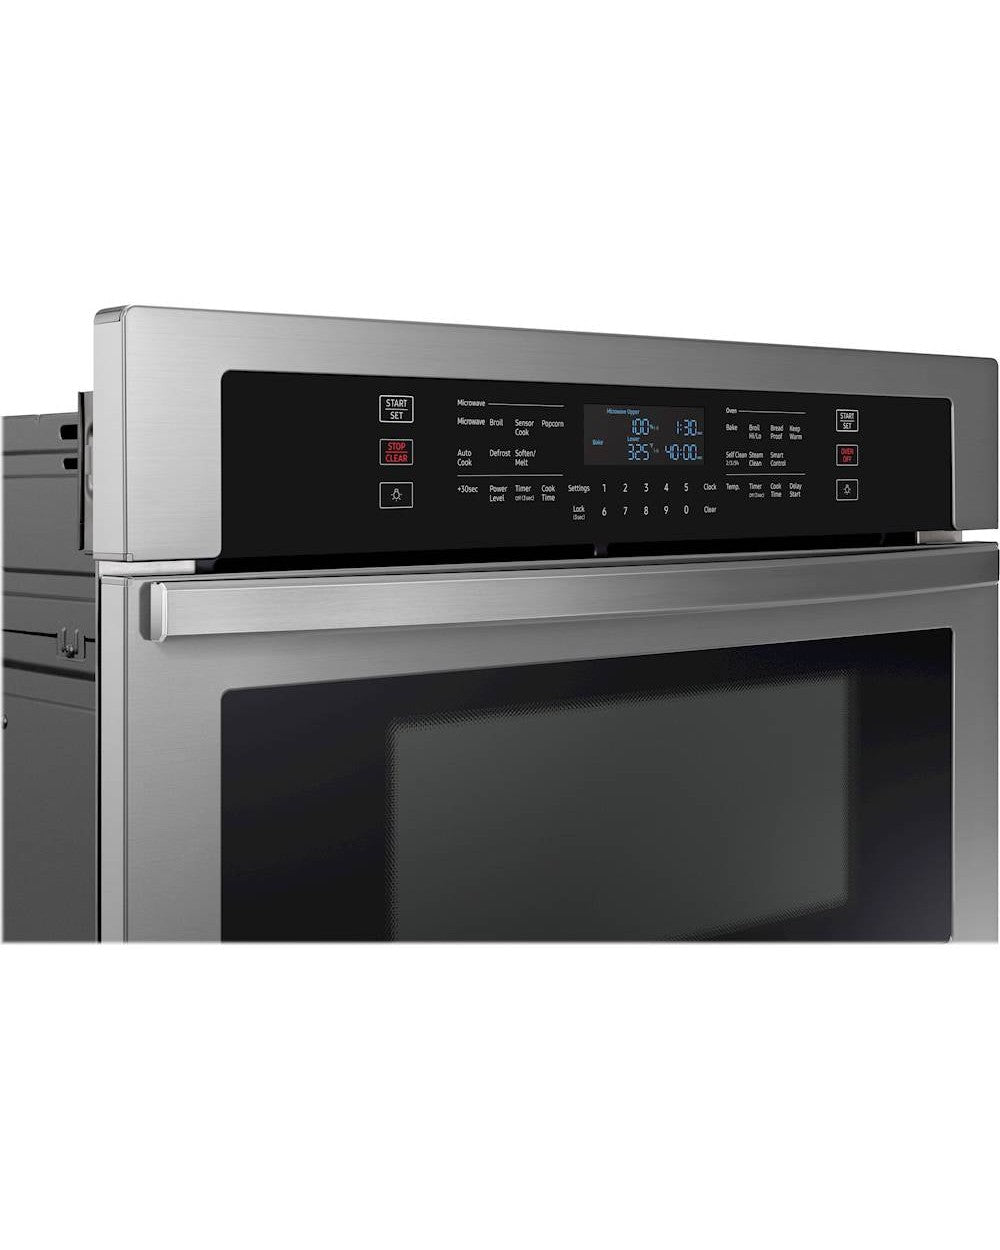 SAMSUNG NQ70T5511DS/AA 30&quot; Smart Microwave Combination Wall Oven